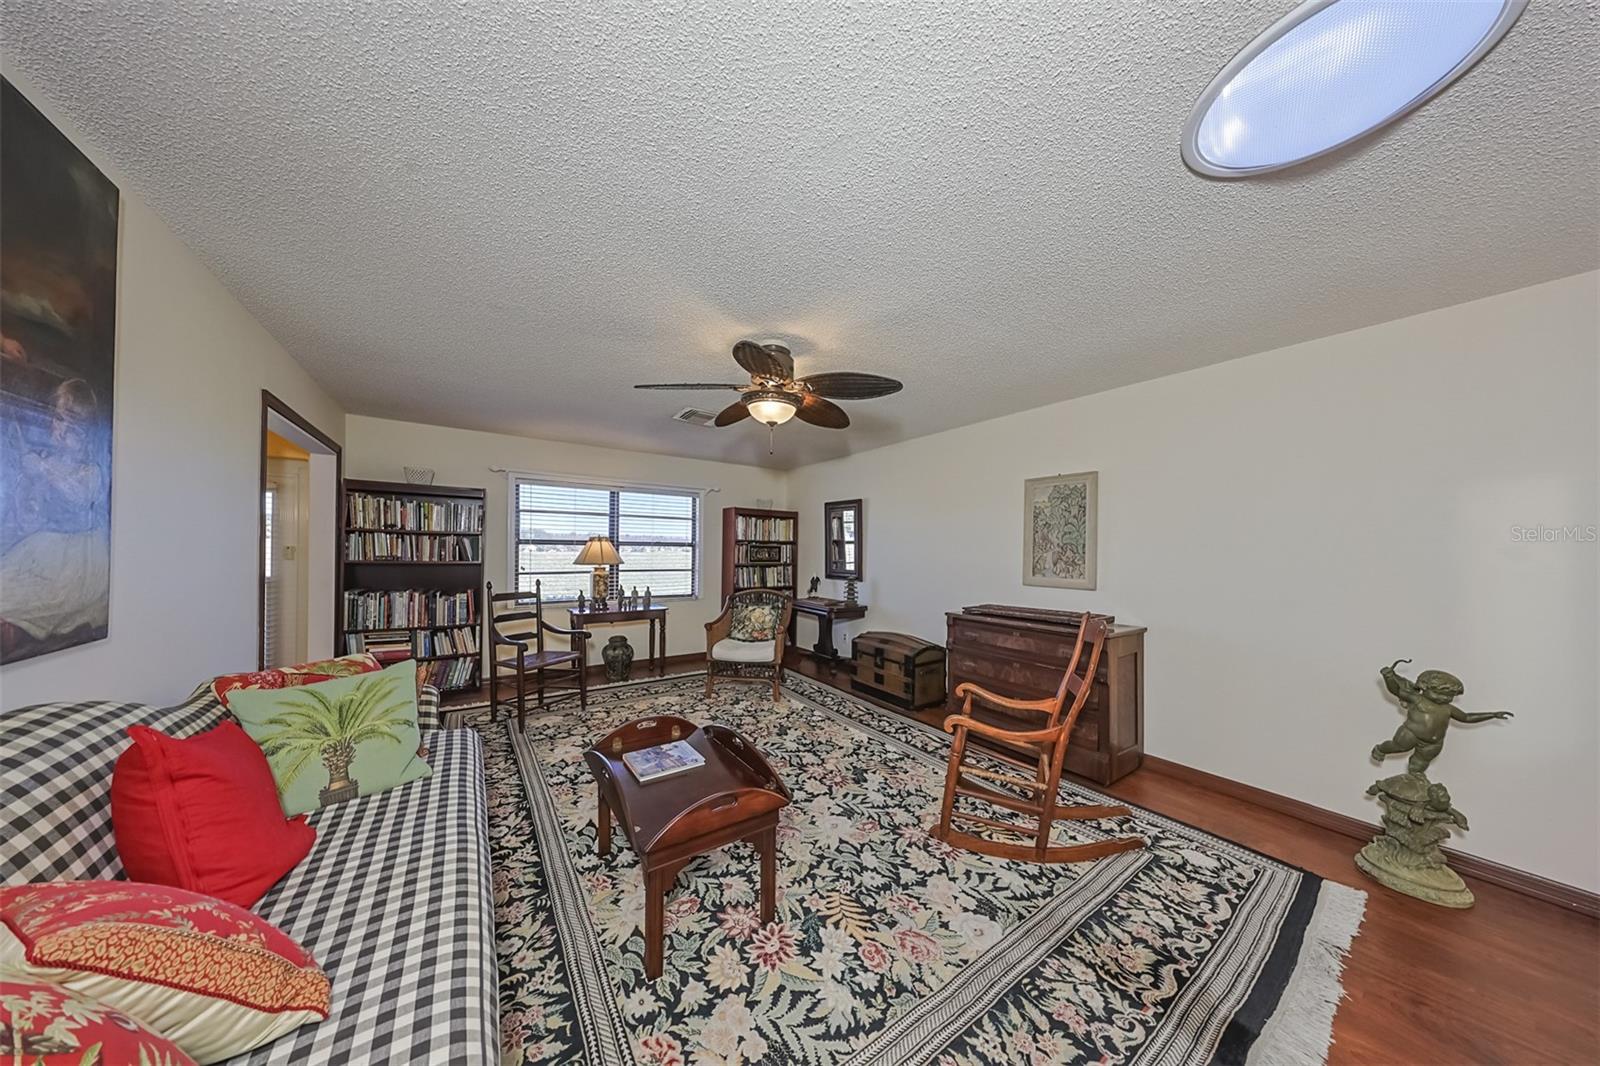 Living Room has neutral colors with a custom ceiling fan including lights.  All furniture and furnishings are remaining with the home, but the seller will remove upon request of the buyer.